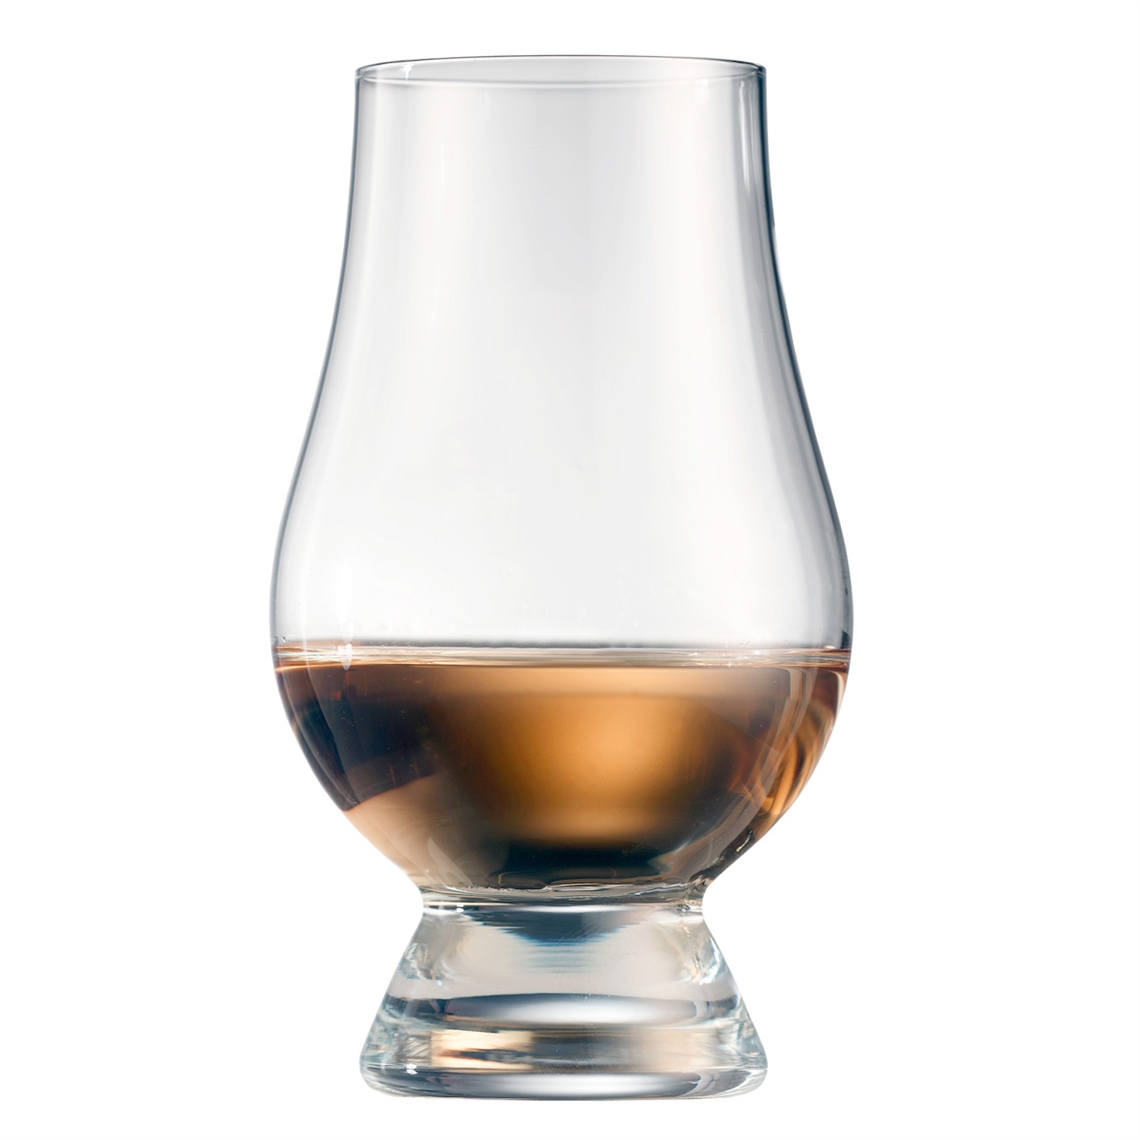 View more mark thomas from our Whisky Glasses range